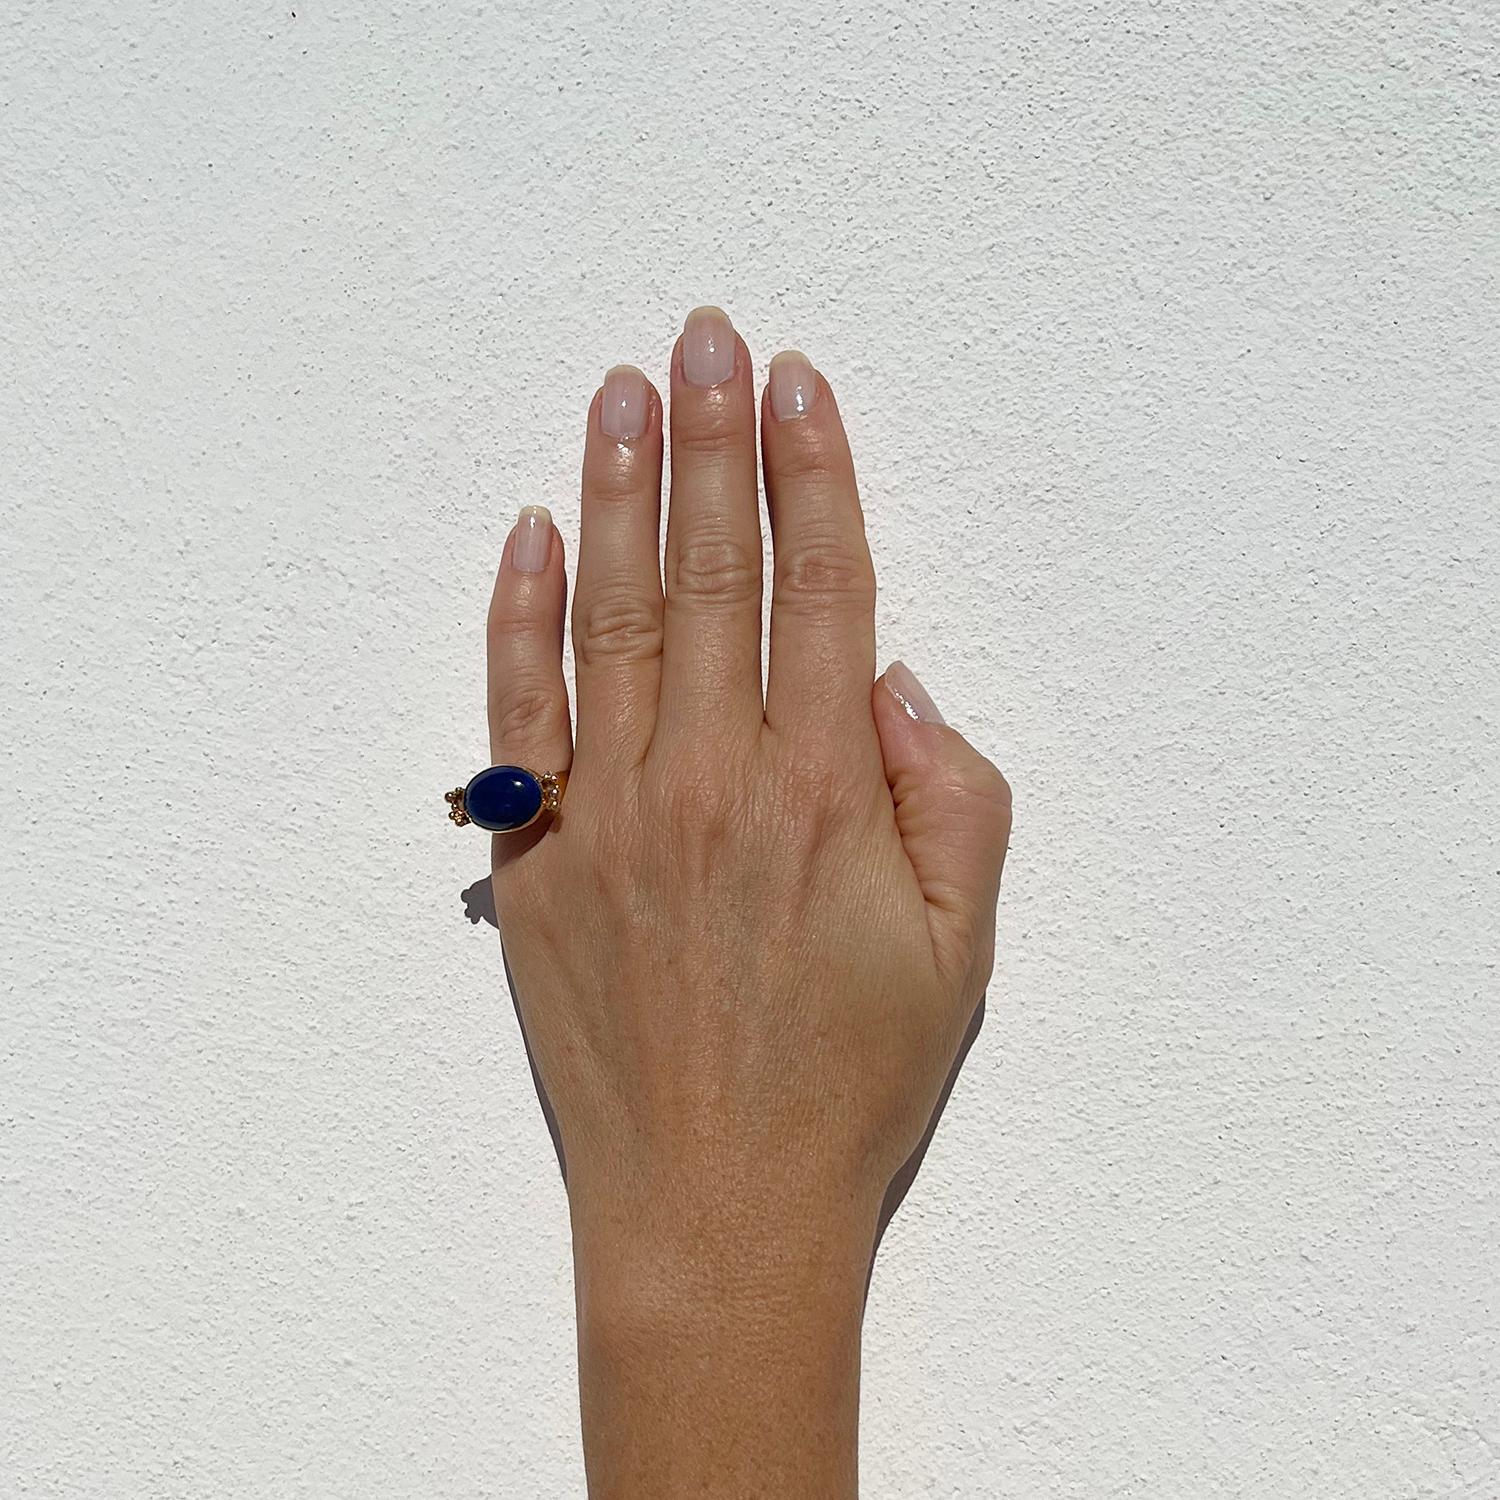 18 K Gold Ring with a Cabochon Cut Lapis Lazuli Stone, Made in 1972 For Sale 9